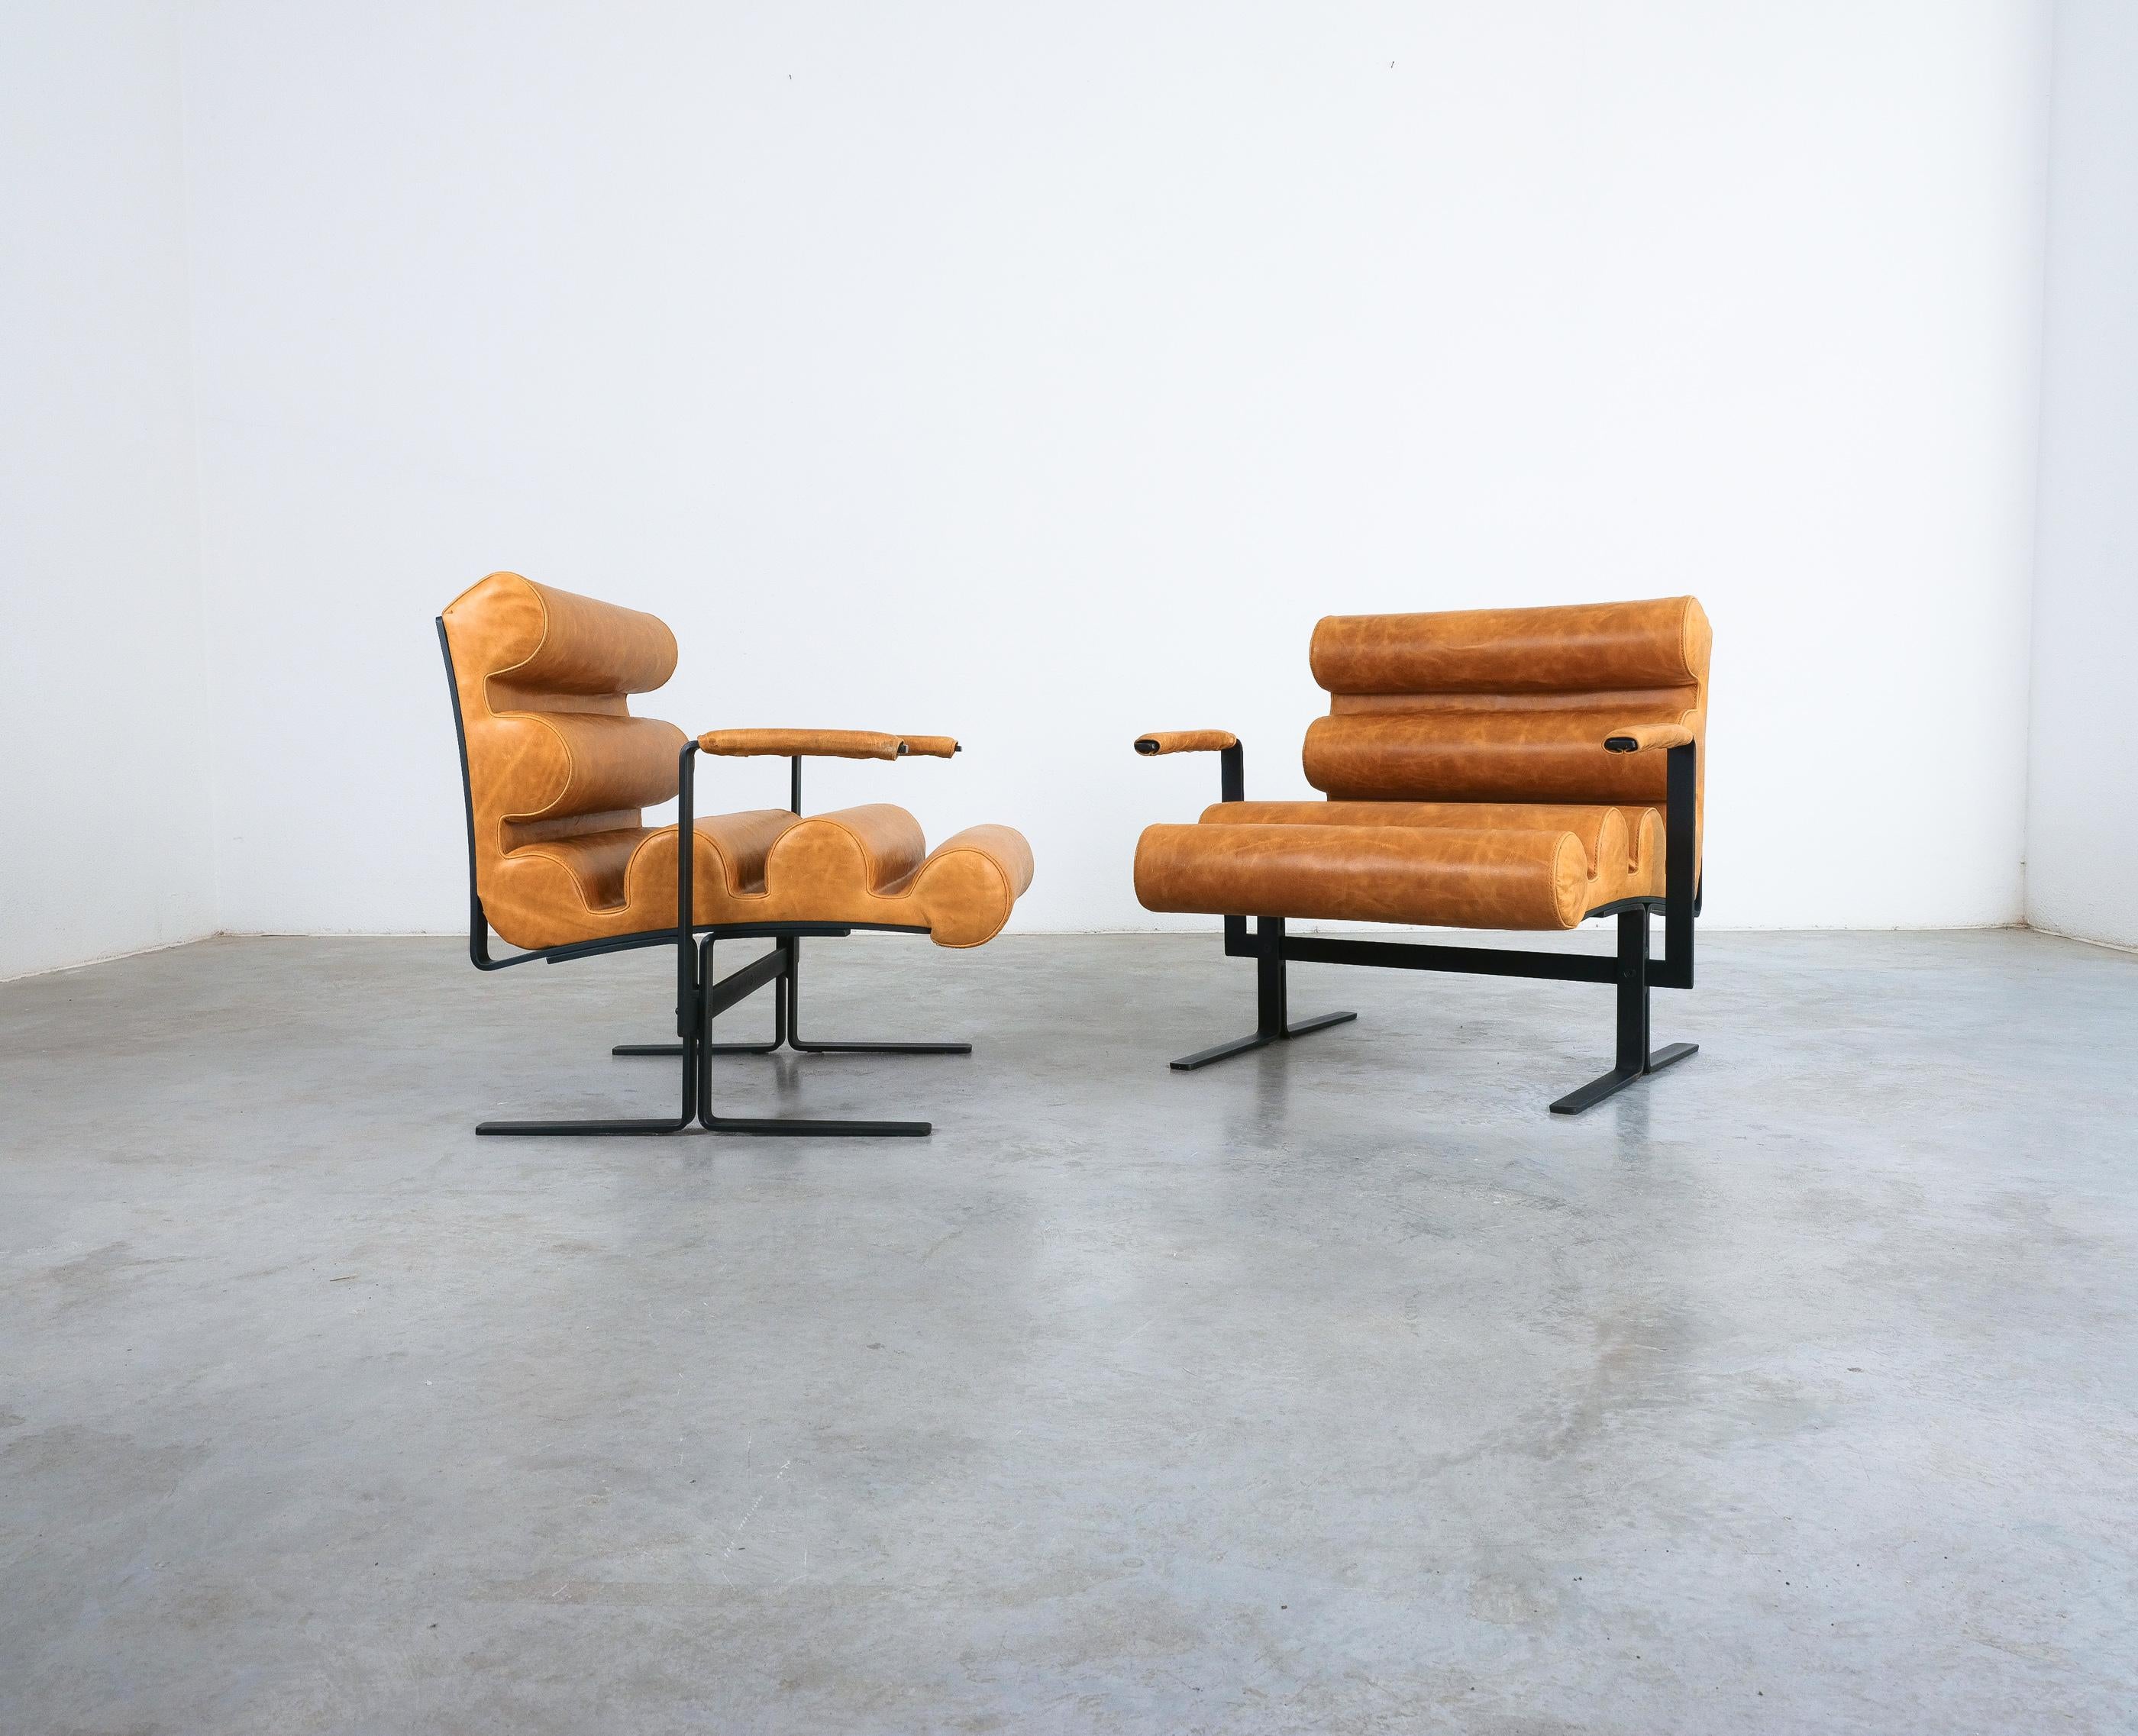 Joe Colombo for Sormani, Roll Brown Leather Spring Steel Armchairs, Pair (2) , 1962- Priced as a pair.

Very stylish armchairs designed by Joe Colombo in 1962. This pair of very rare Space Age icons was produced in Italy by Sormani from 1962 to